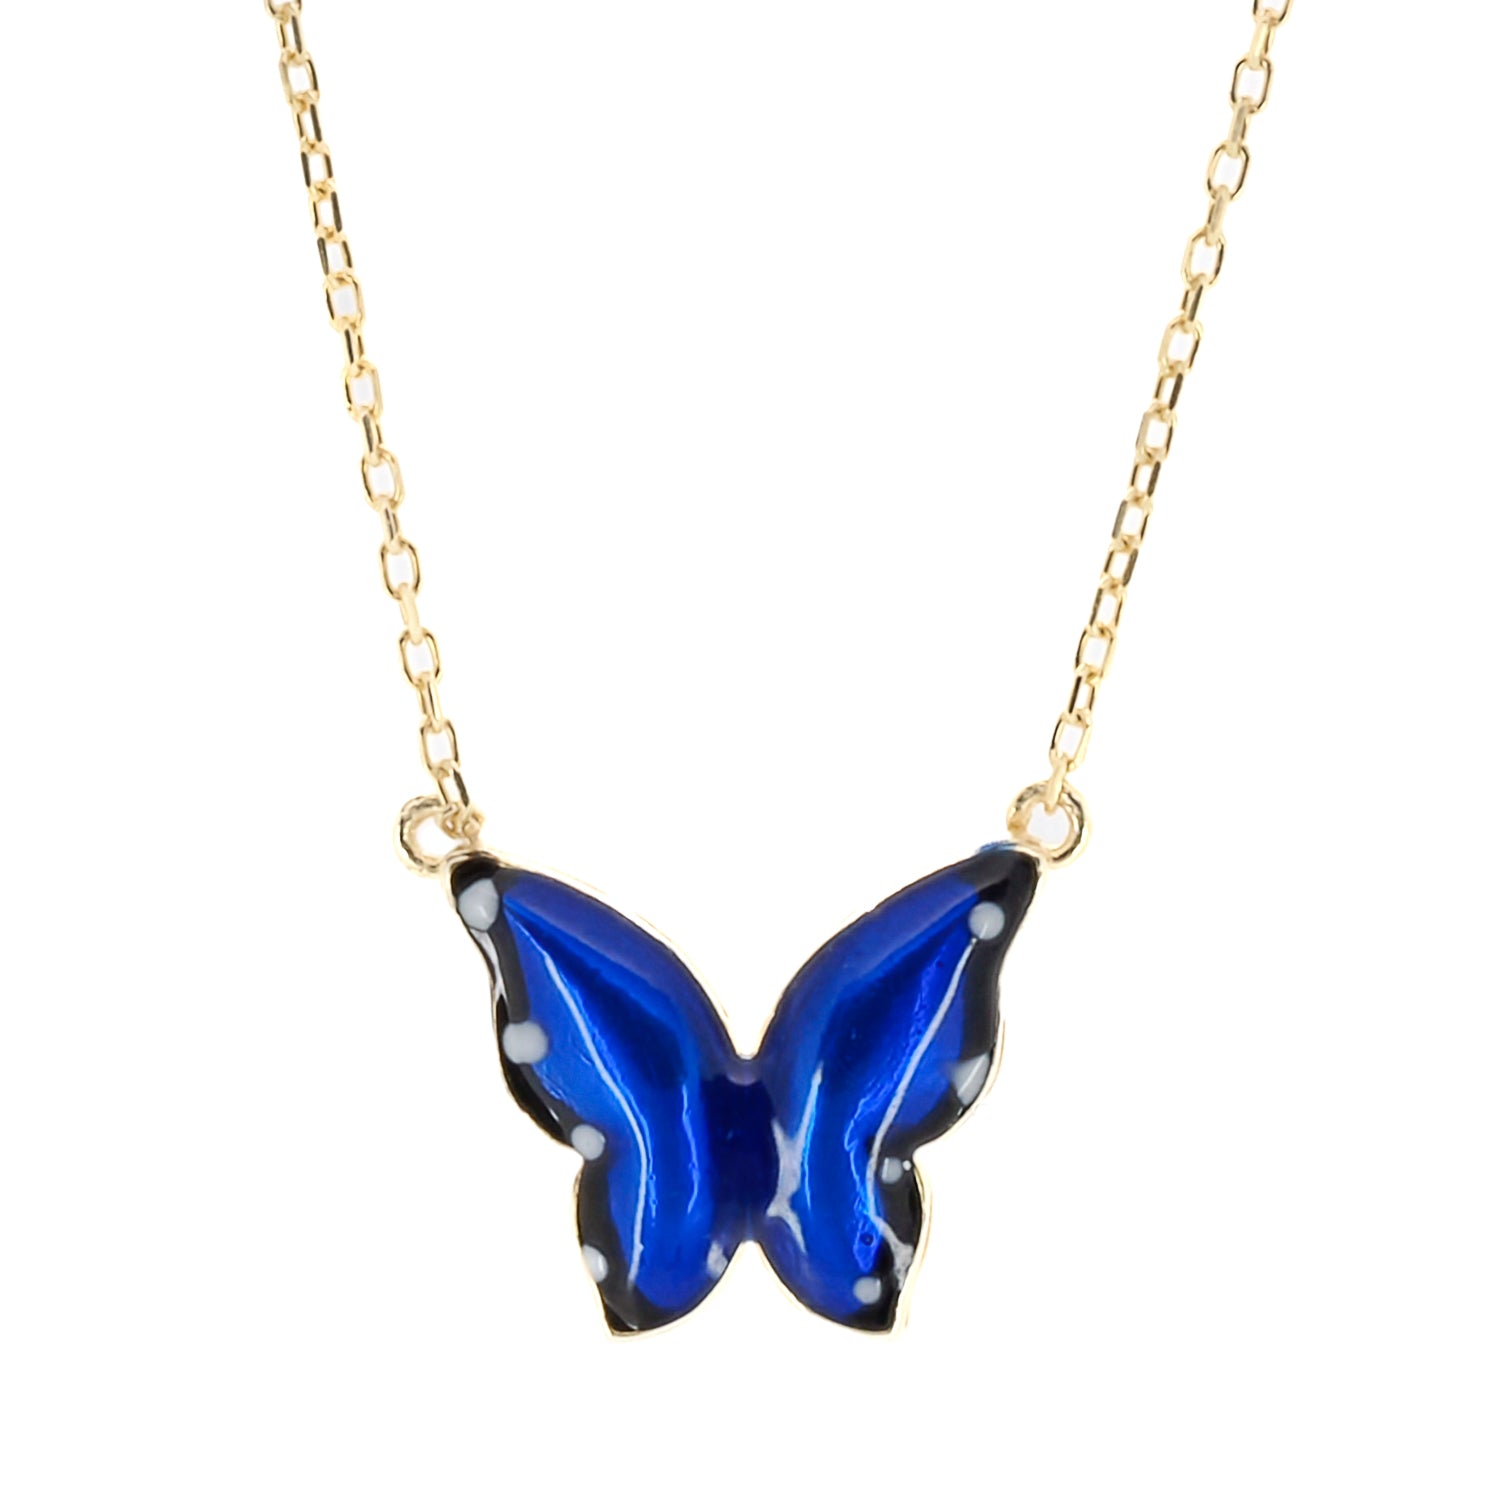 Gold Spiritual Blue Enamel Butterfly Necklace featuring a captivating butterfly pendant with blue enamel on a 925 sterling silver chain plated with 18K gold.